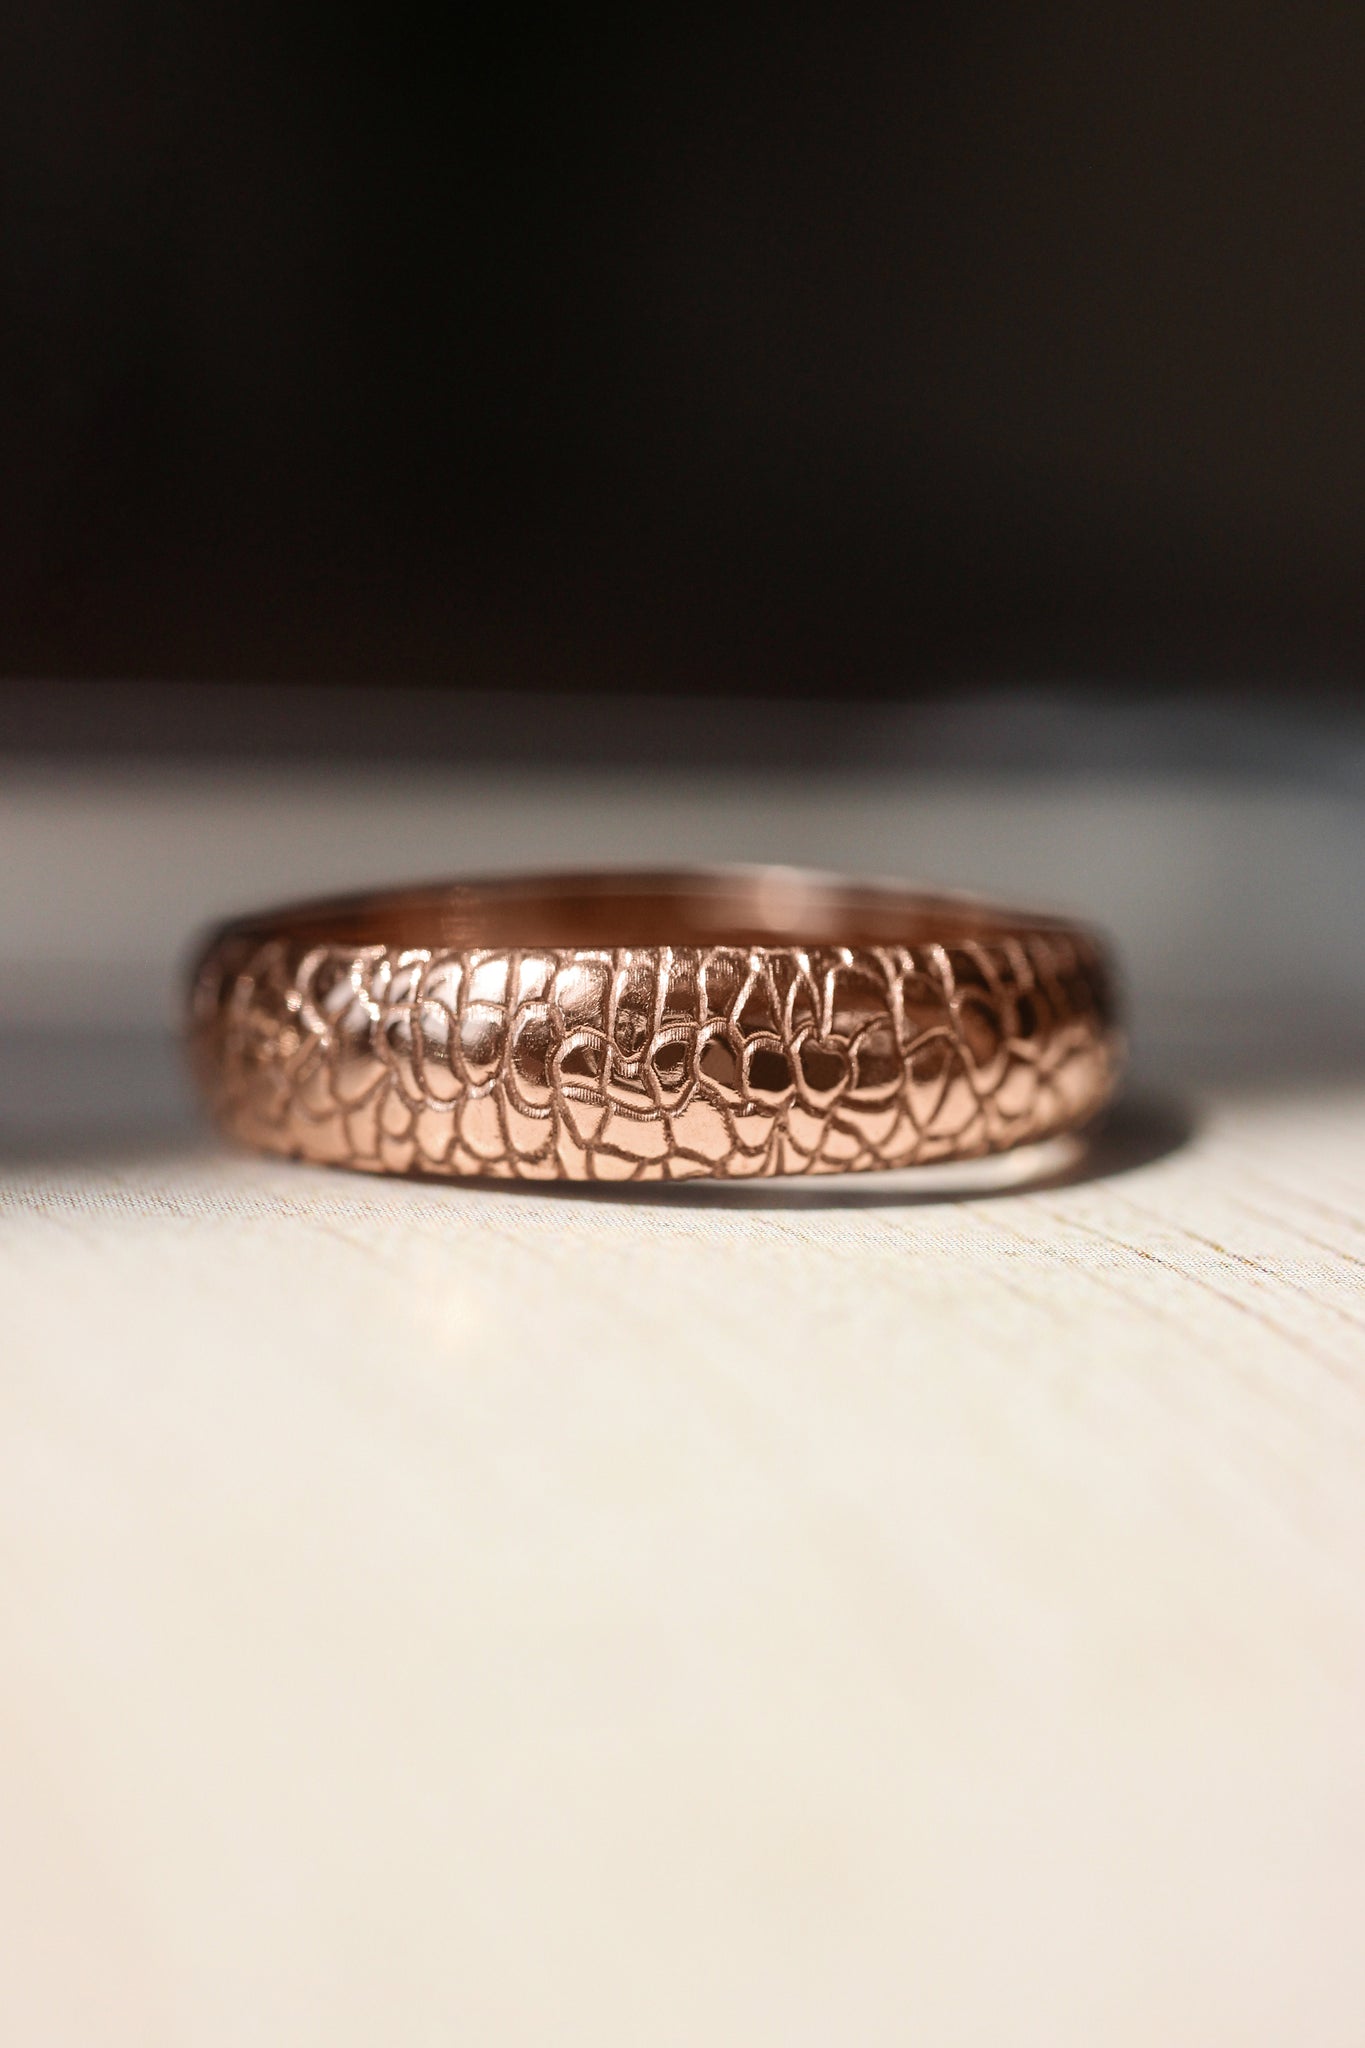 Reptile skin ring, 5 mm wedding band for man - Eden Garden Jewelry™